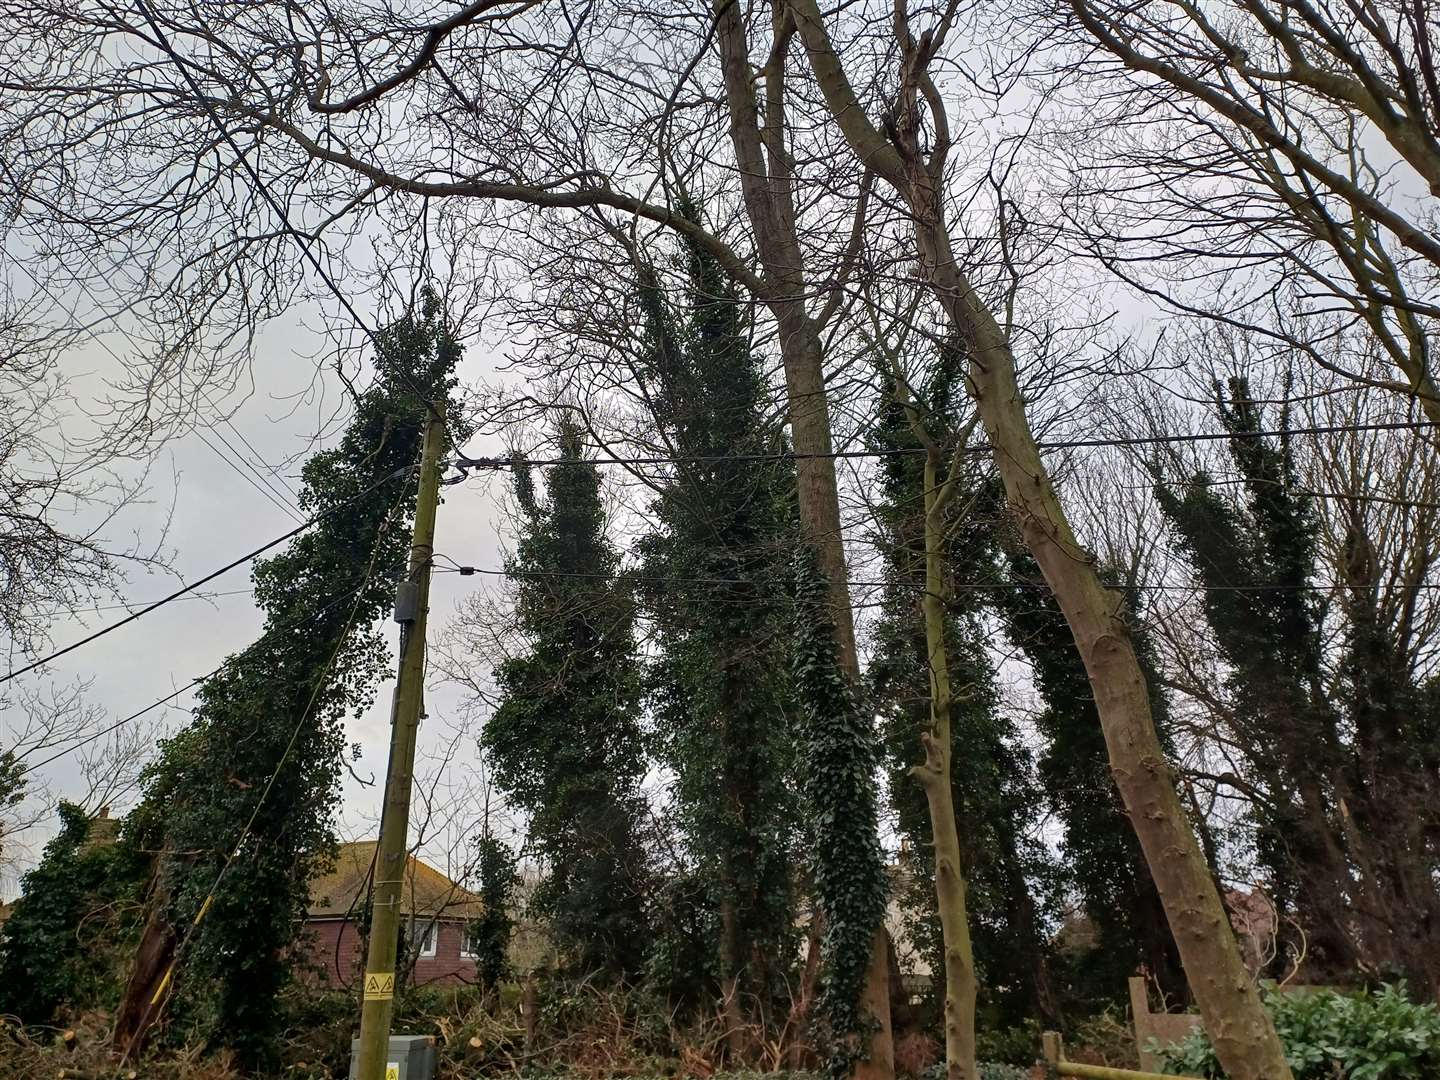 Residents are concerned more trees will fall in the future